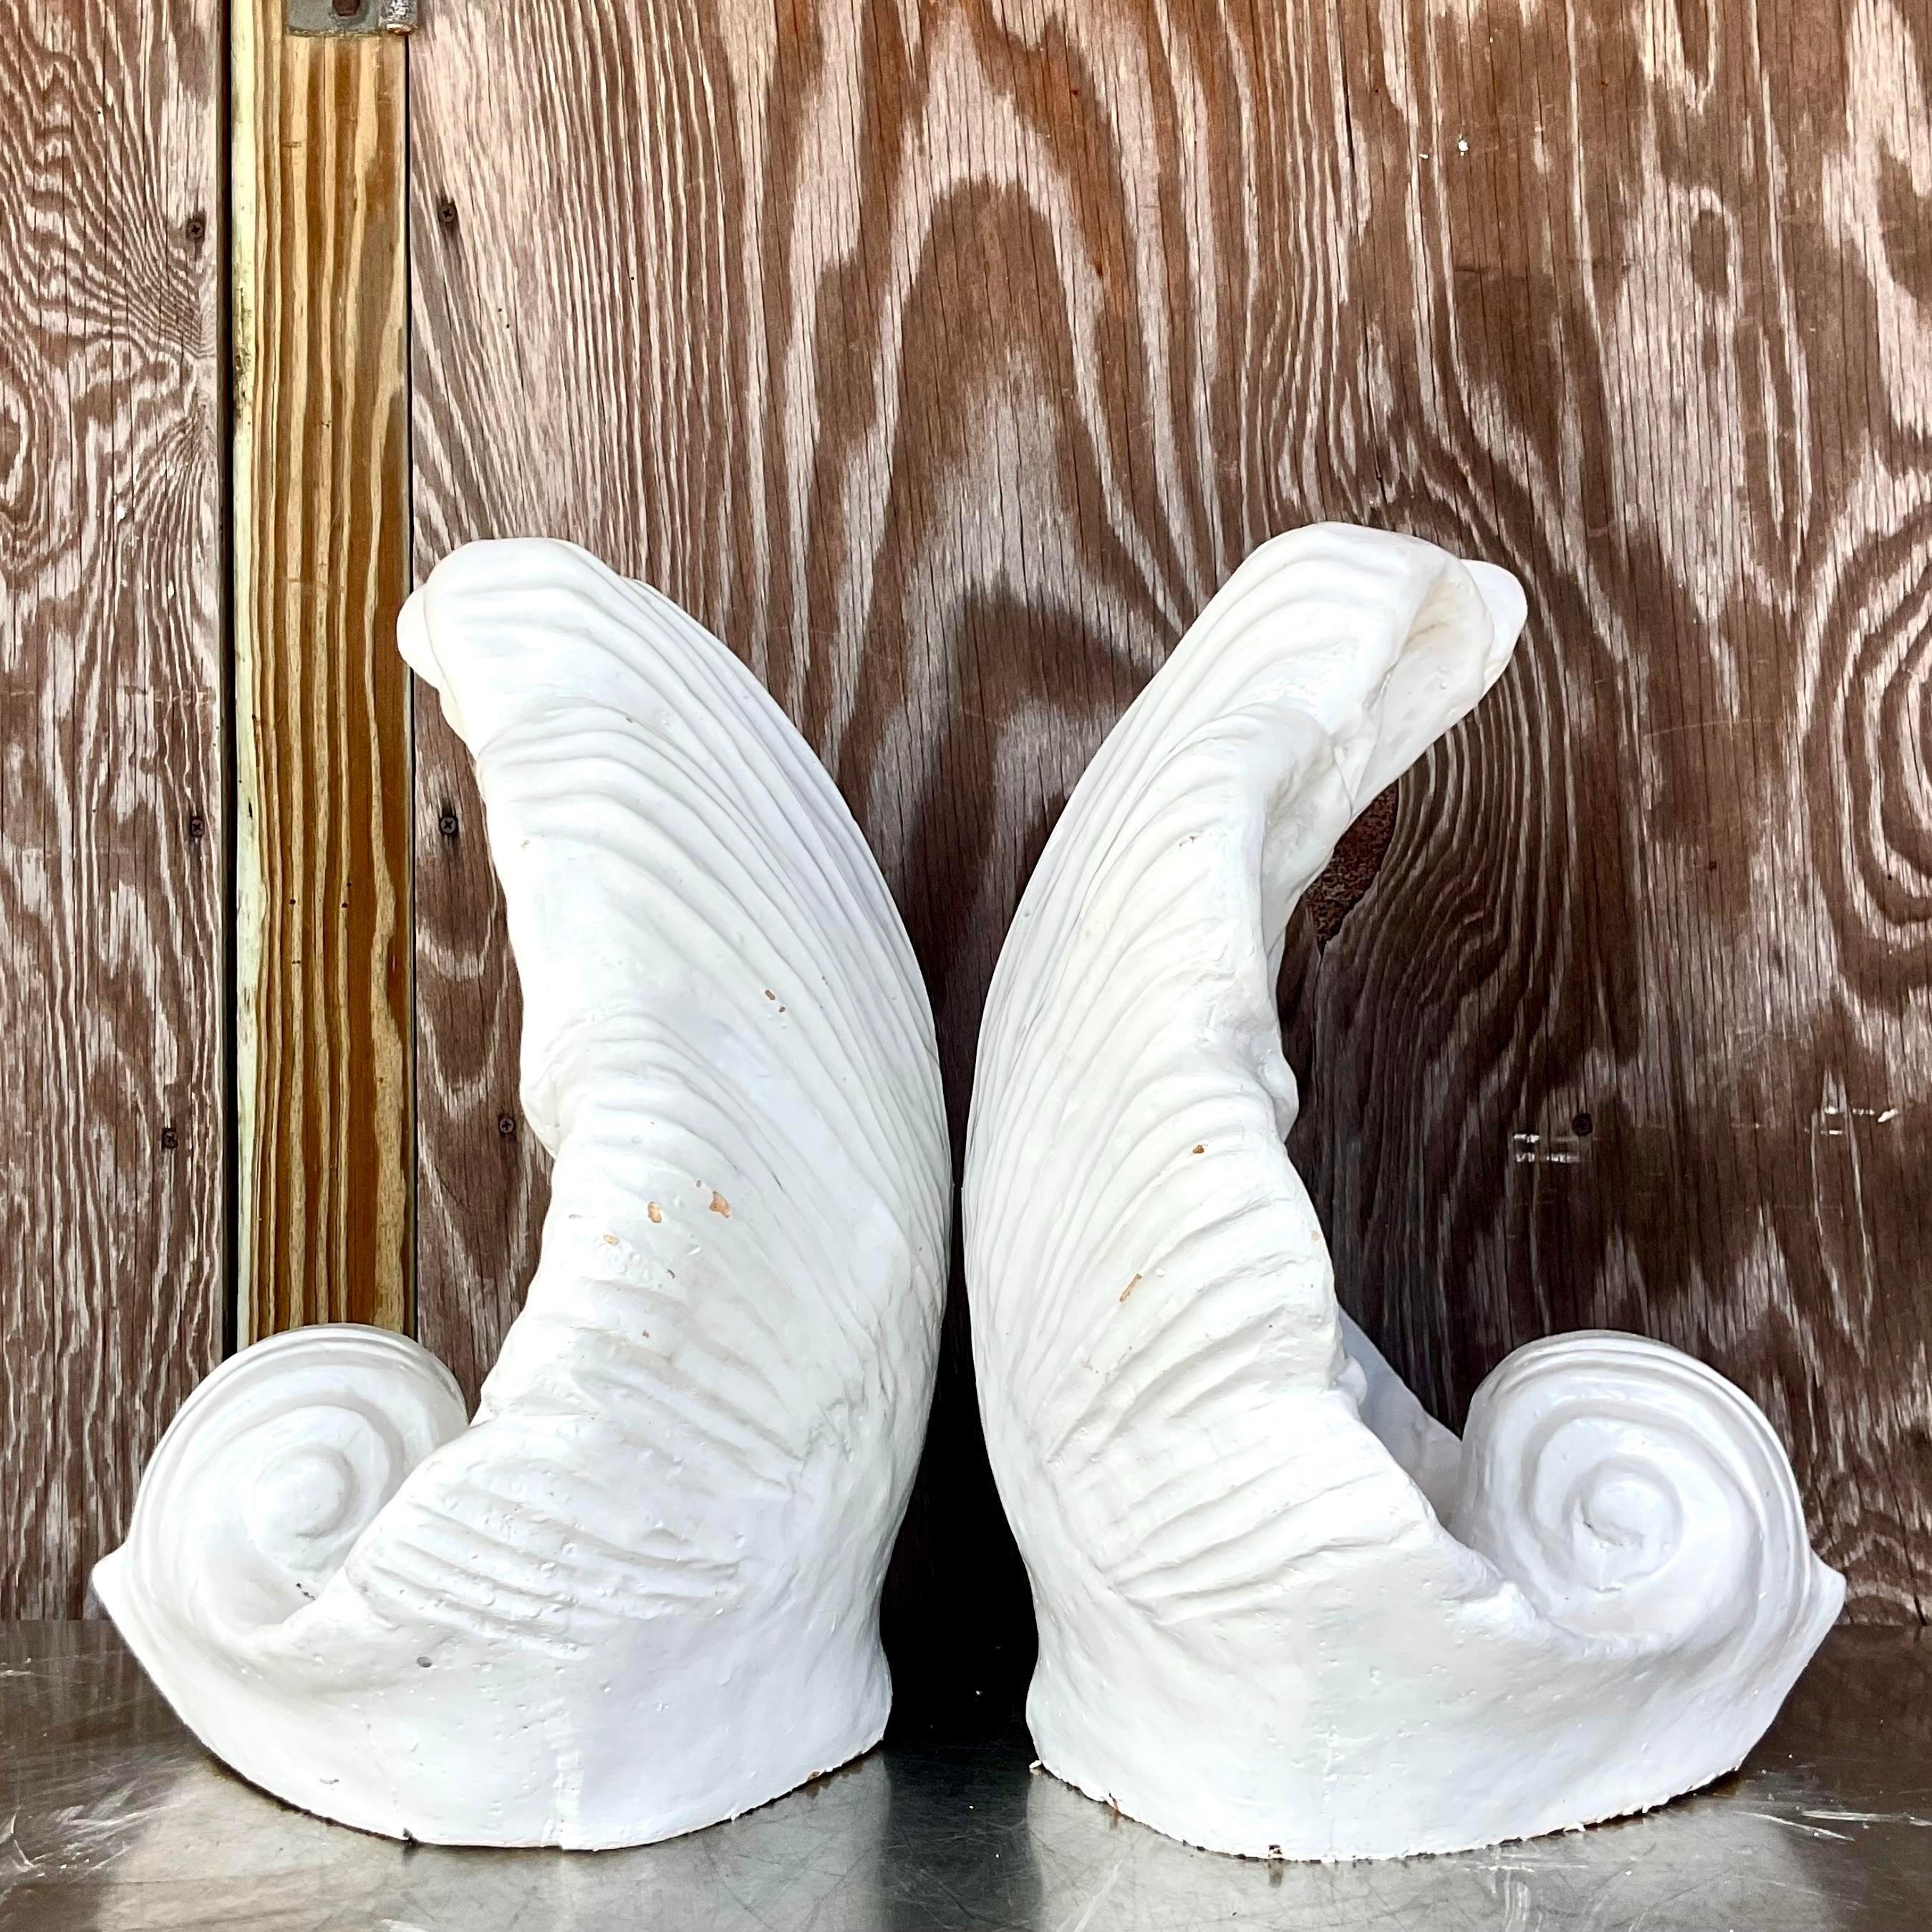 Vintage Coastal Glazed Ceramic Clam Shells - a Pair In Good Condition For Sale In west palm beach, FL